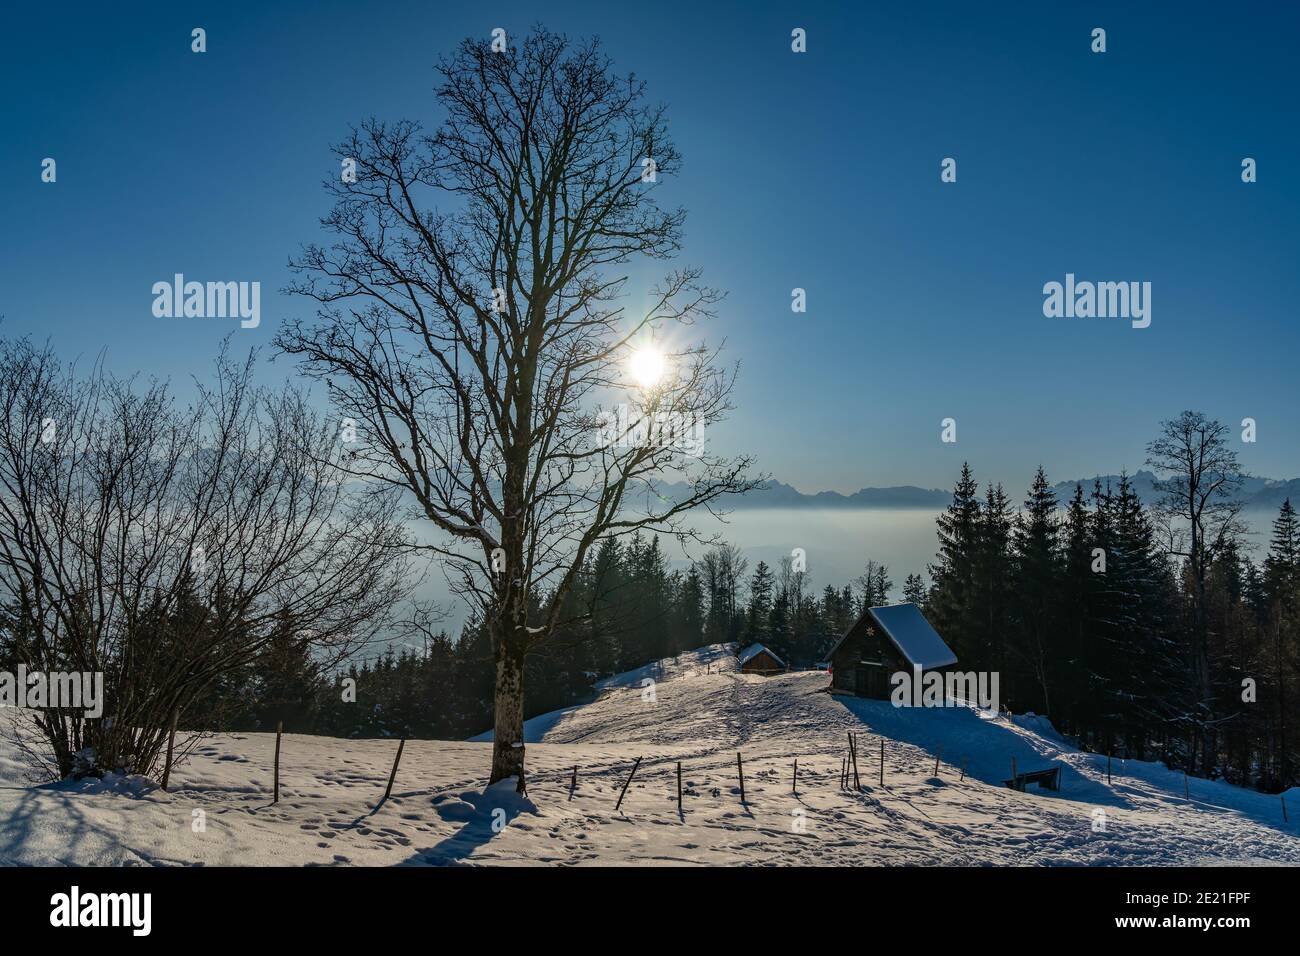 Landscape over Viktorsberg in the Austrian mountains. Alpine hut at the edge of the forest on the snowy field. the snow glitters, glows on the meadow Stock Photo